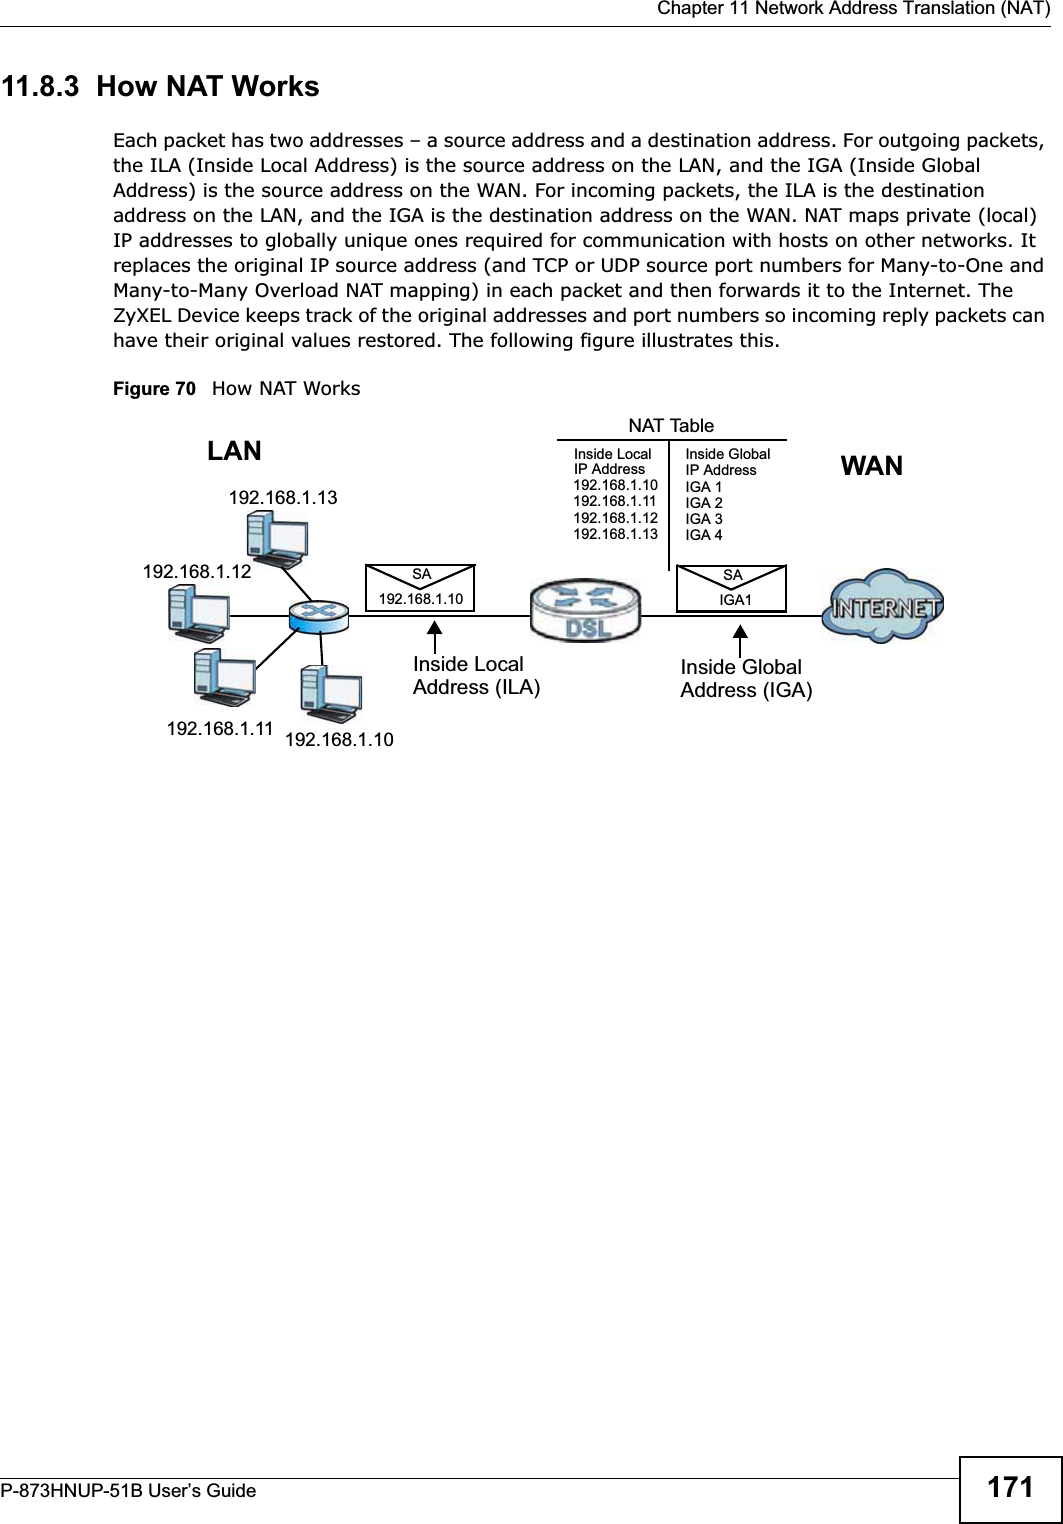  Chapter 11 Network Address Translation (NAT)P-873HNUP-51B User’s Guide 17111.8.3  How NAT WorksEach packet has two addresses – a source address and a destination address. For outgoing packets, the ILA (Inside Local Address) is the source address on the LAN, and the IGA (Inside Global Address) is the source address on the WAN. For incoming packets, the ILA is the destination address on the LAN, and the IGA is the destination address on the WAN. NAT maps private (local) IP addresses to globally unique ones required for communication with hosts on other networks. It replaces the original IP source address (and TCP or UDP source port numbers for Many-to-One and Many-to-Many Overload NAT mapping) in each packet and then forwards it to the Internet. The ZyXEL Device keeps track of the original addresses and port numbers so incoming reply packets can have their original values restored. The following figure illustrates this.Figure 70   How NAT Works192.168.1.13192.168.1.10192.168.1.11192.168.1.12 SA192.168.1.10SAIGA1Inside LocalIP Address192.168.1.10192.168.1.11192.168.1.12192.168.1.13Inside Global IP AddressIGA 1IGA 2IGA 3IGA 4NAT TableWANLANInside LocalAddress (ILA)Inside GlobalAddress (IGA)